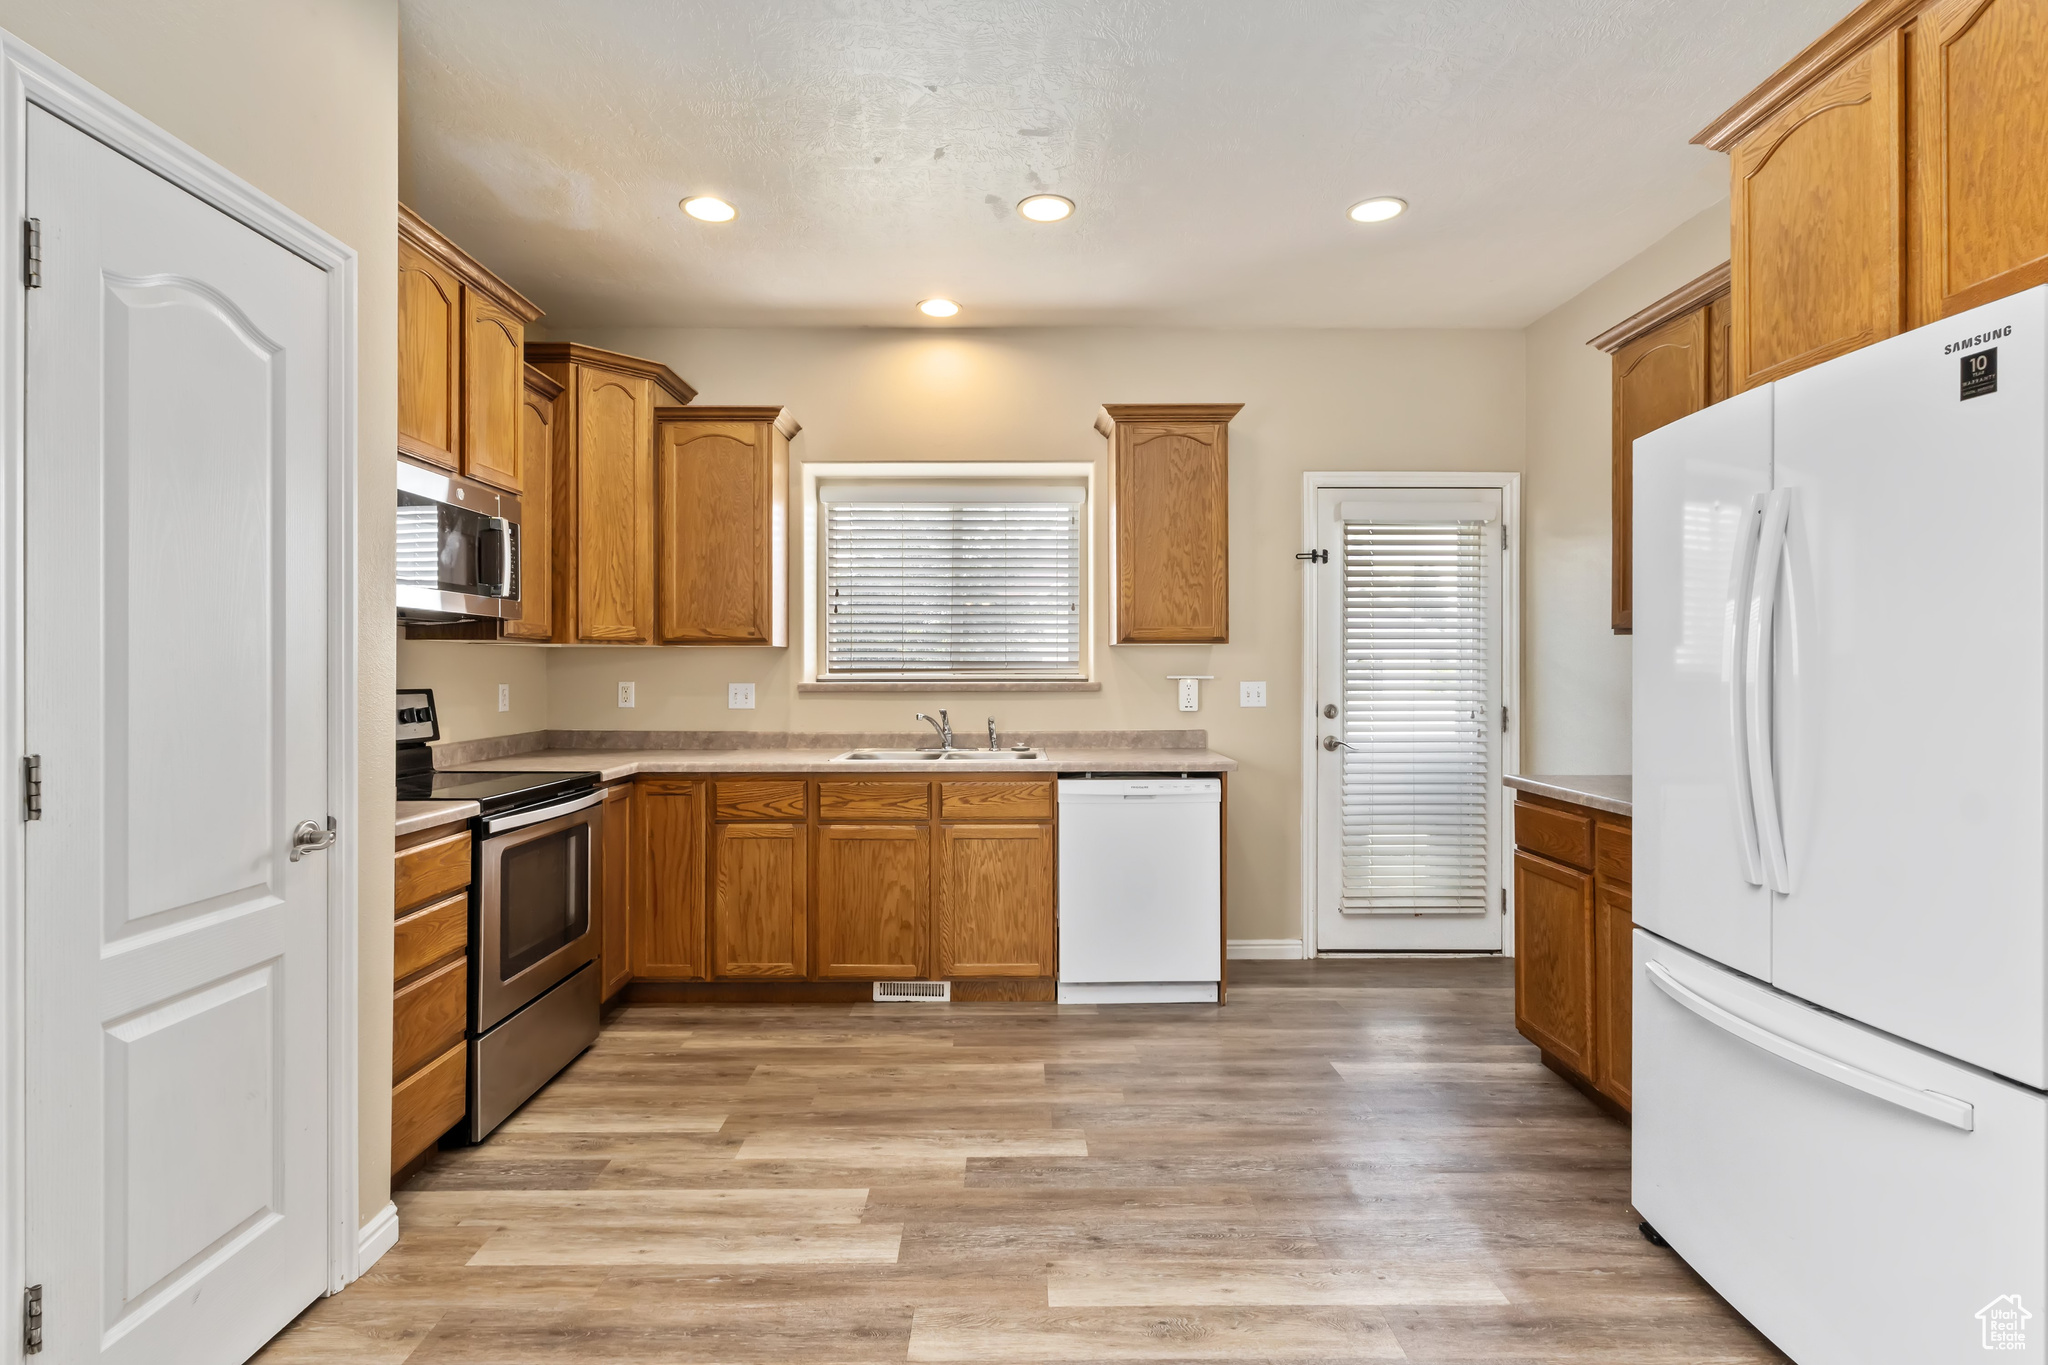 Kitchen featuring appliances with stainless steel finishes, light hardwood / wood-style floors, and sink